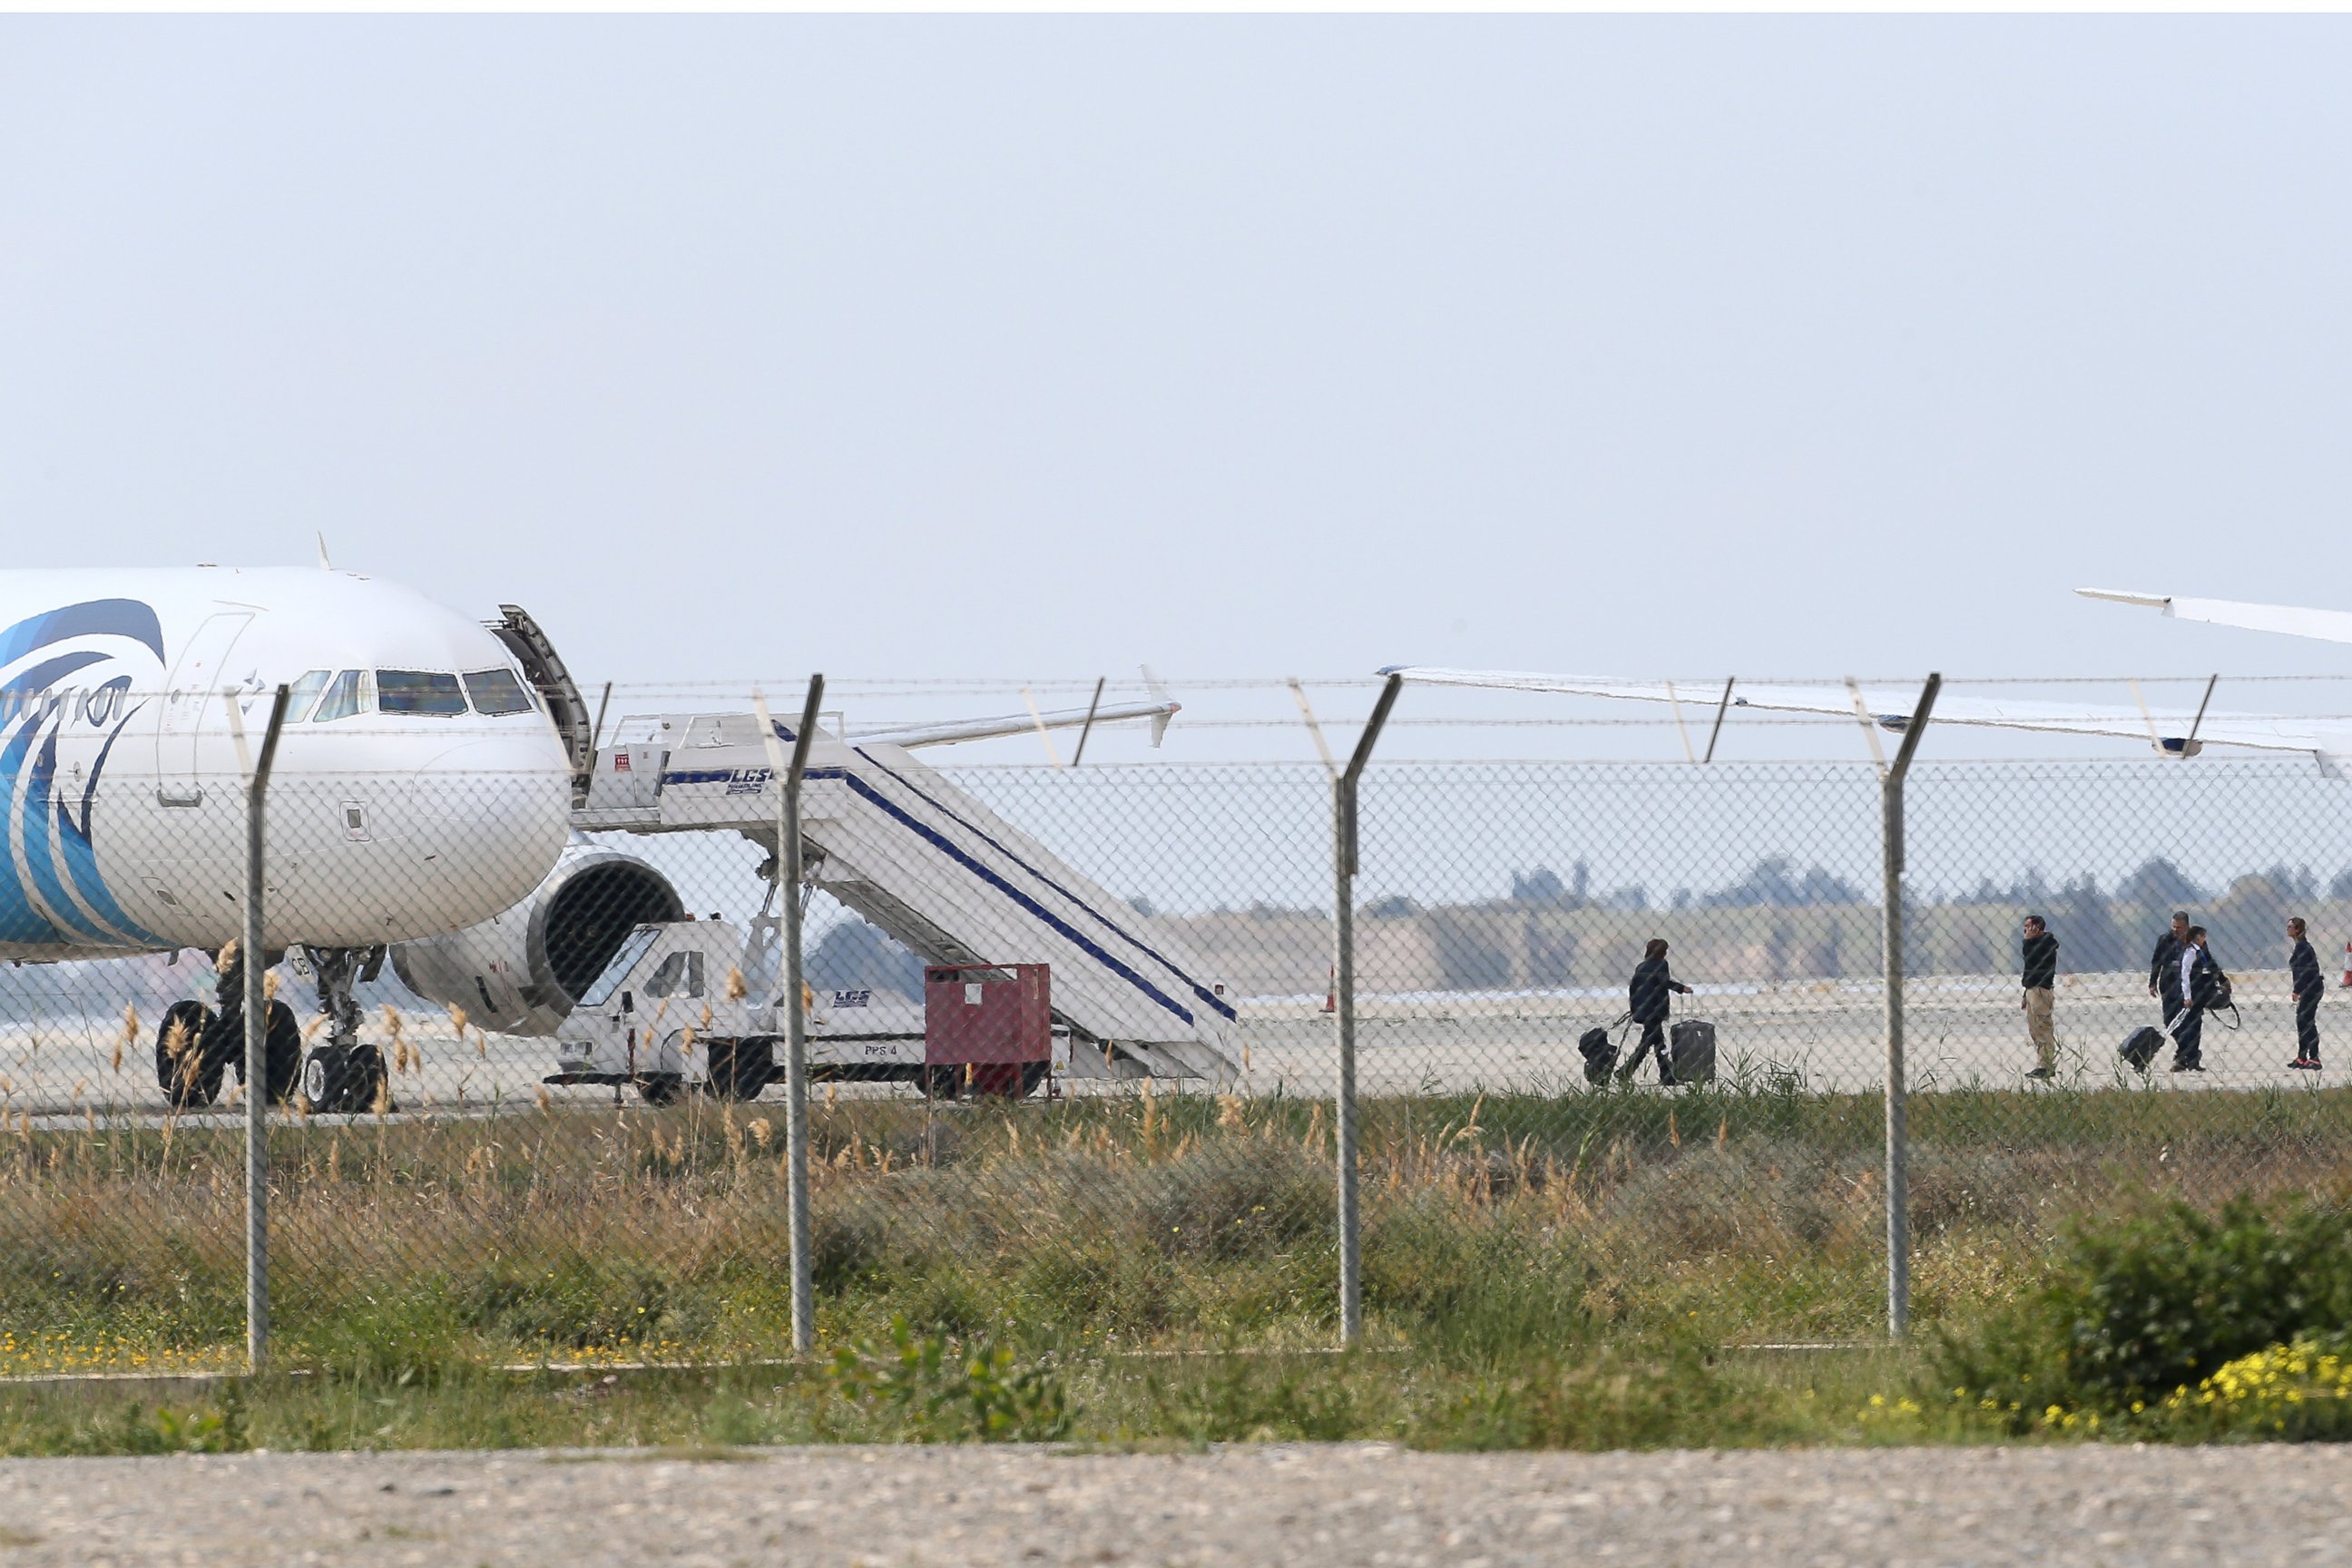 PHOTO: People leave the hijacked aircraft of EgyptAir at Larnaca airport Tuesday, March 29, 2016.